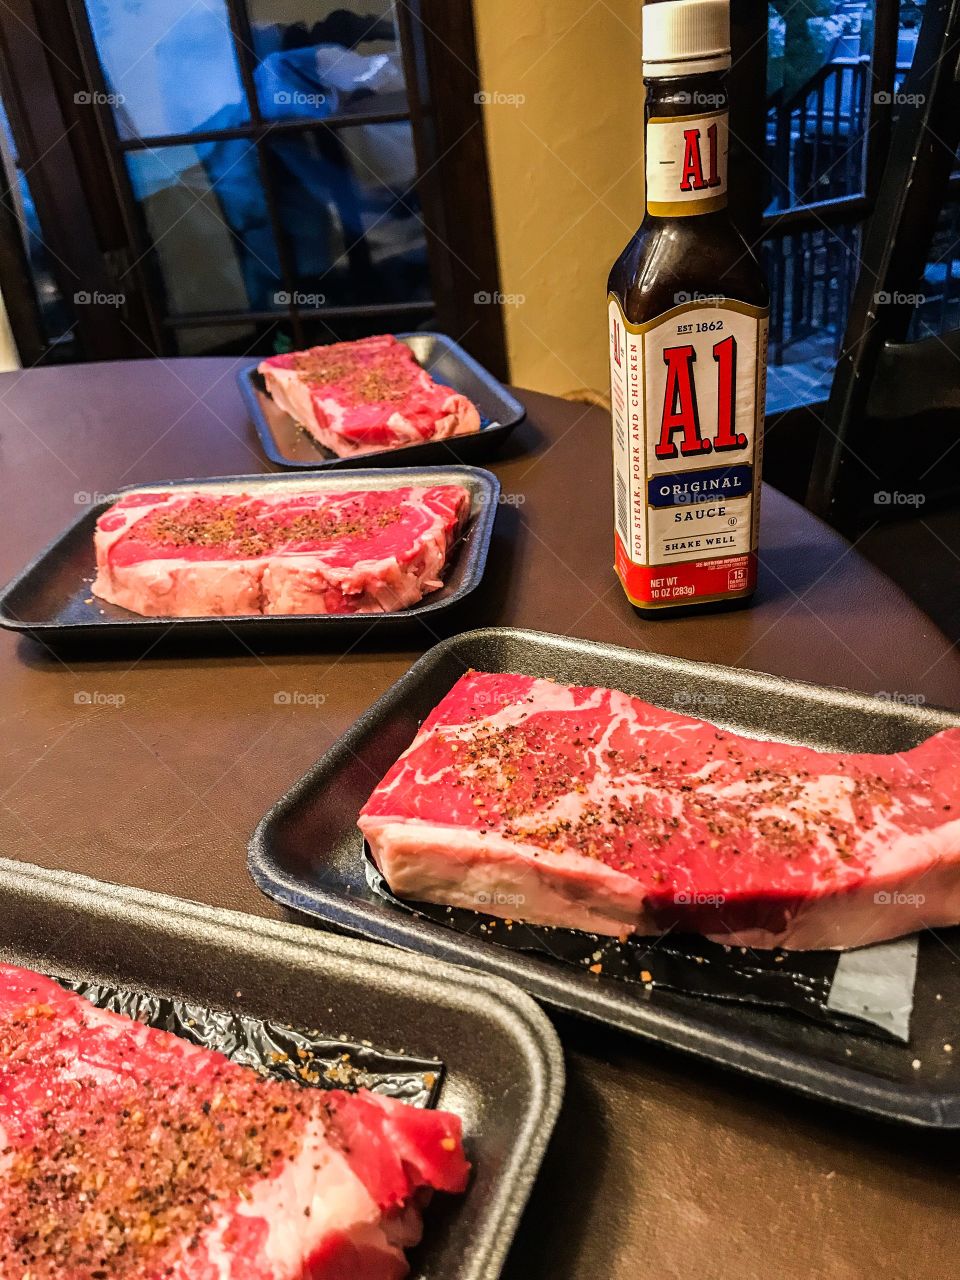 A1 ready to go for when I roast up these tasty steaks
